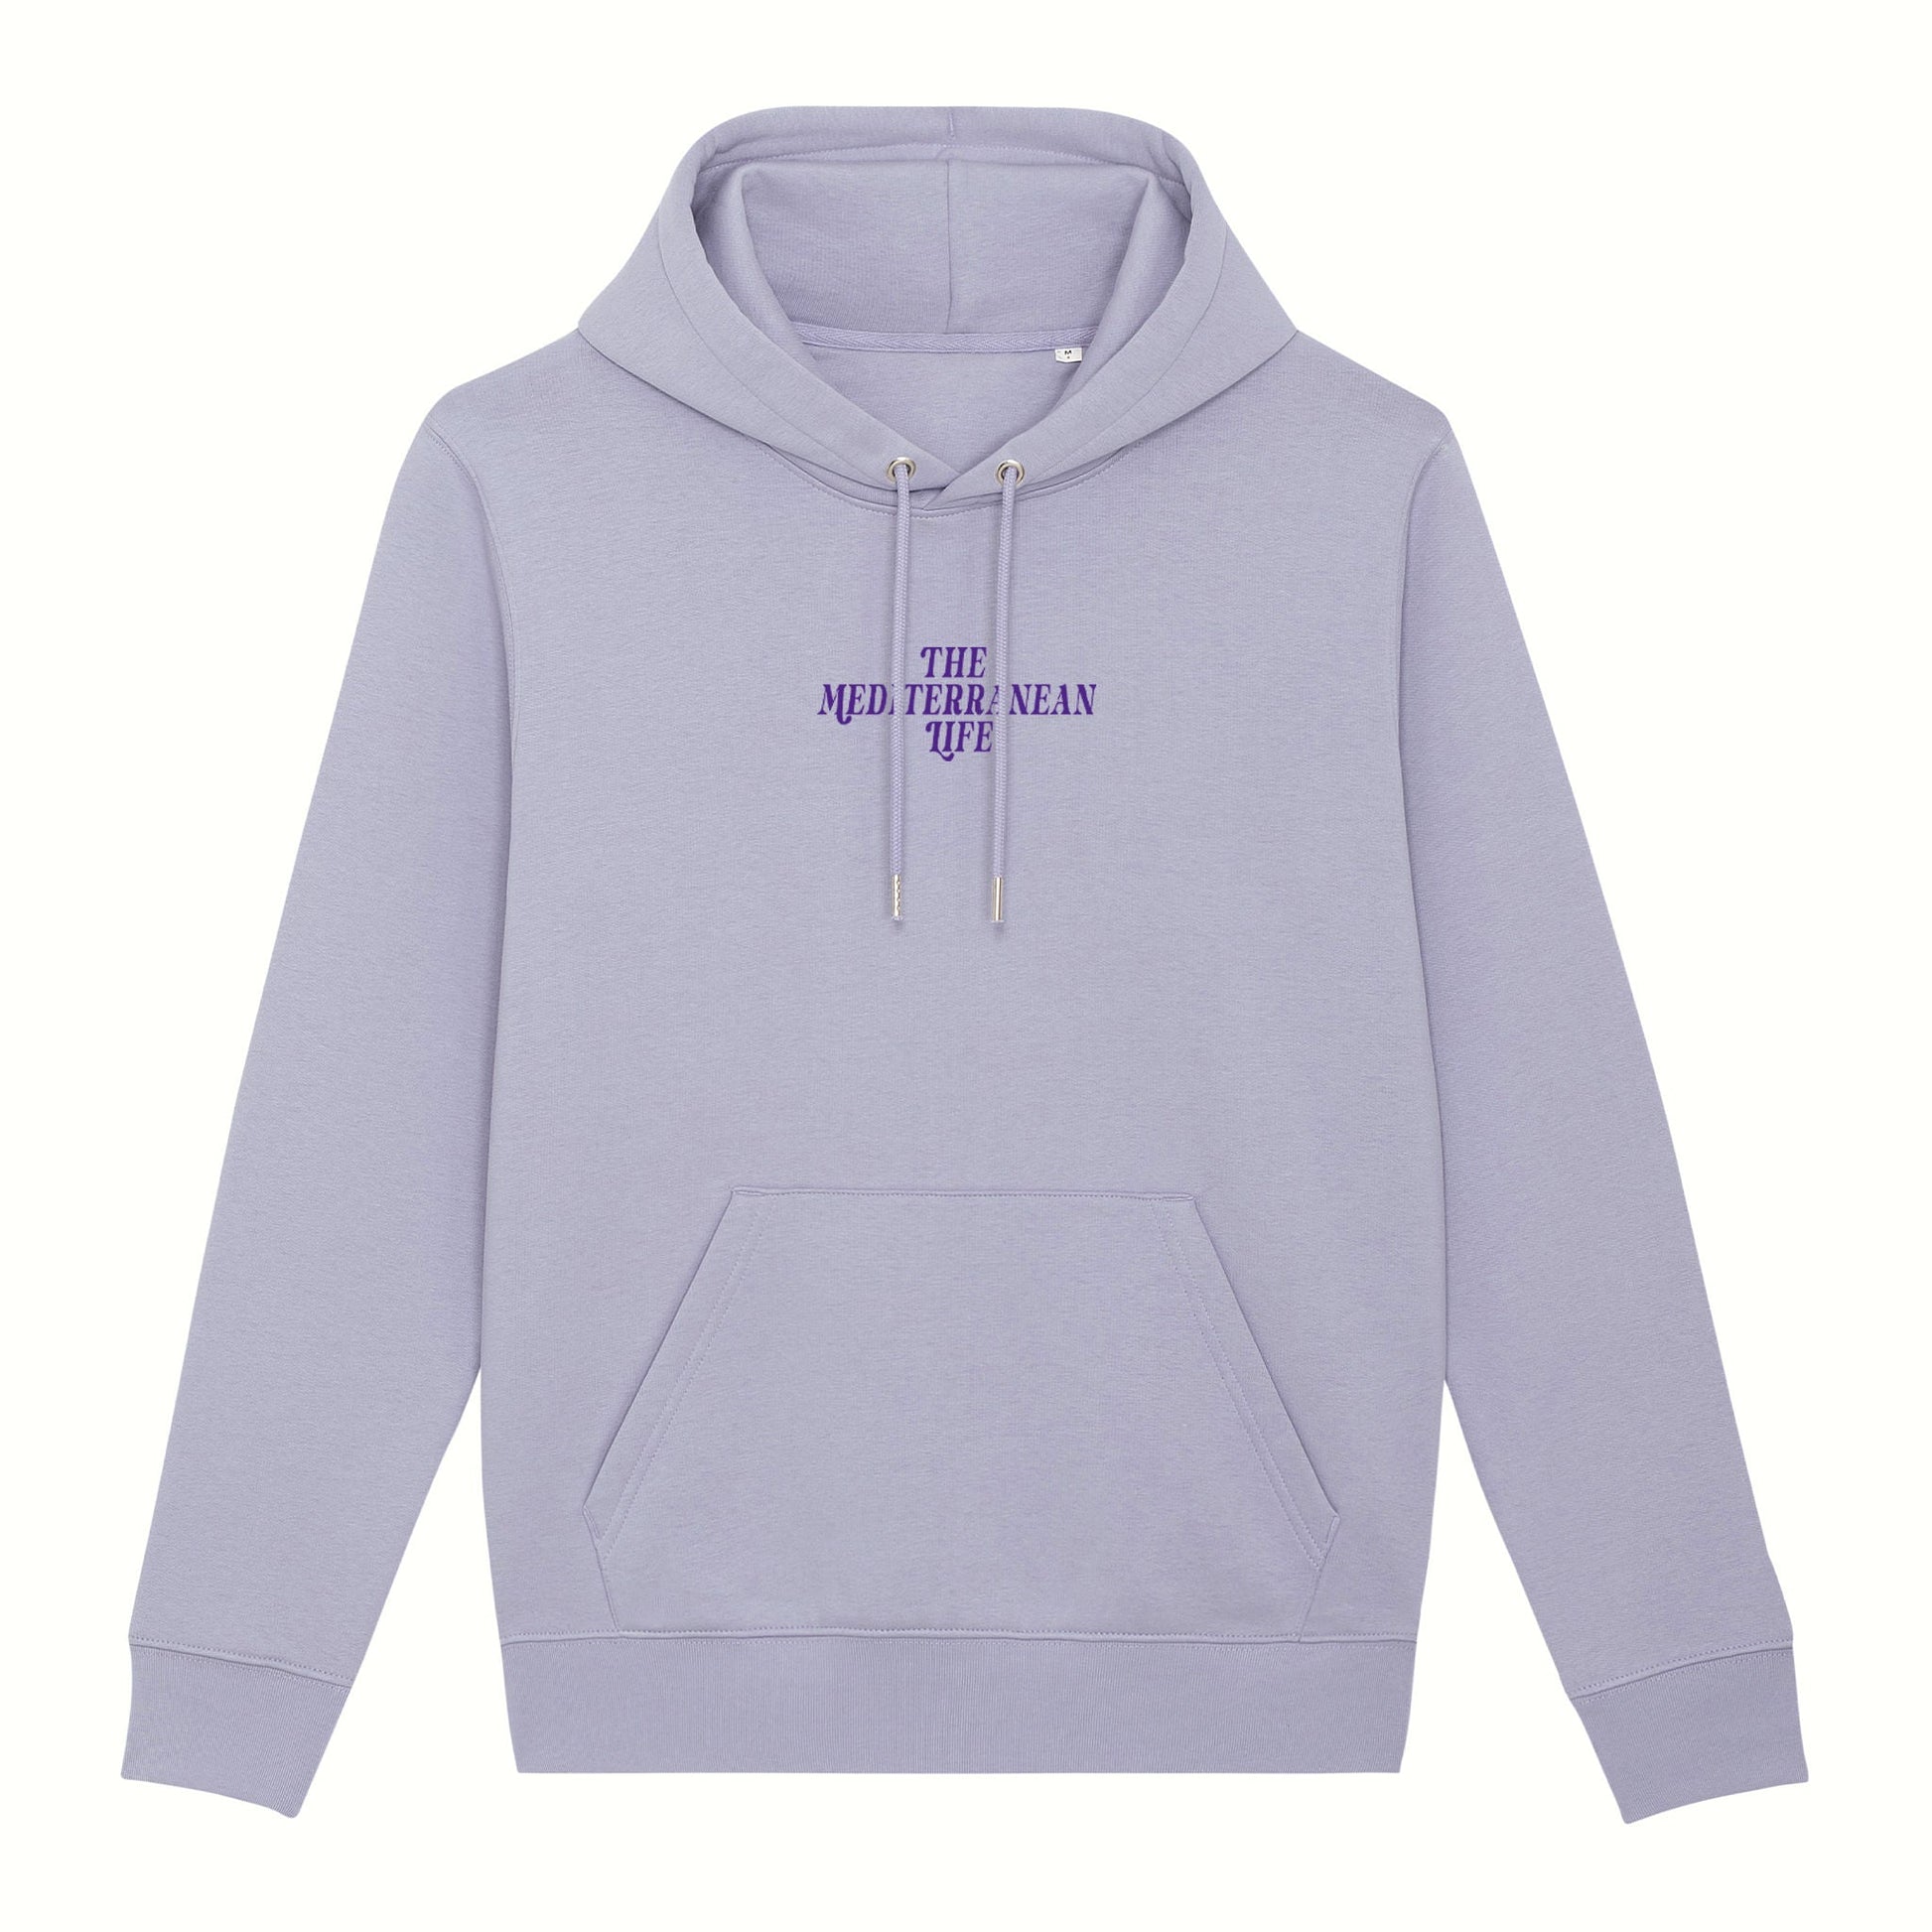 Fear the ordinary lavender premium organic cotton hoodie with indigo adventure inspired front print.